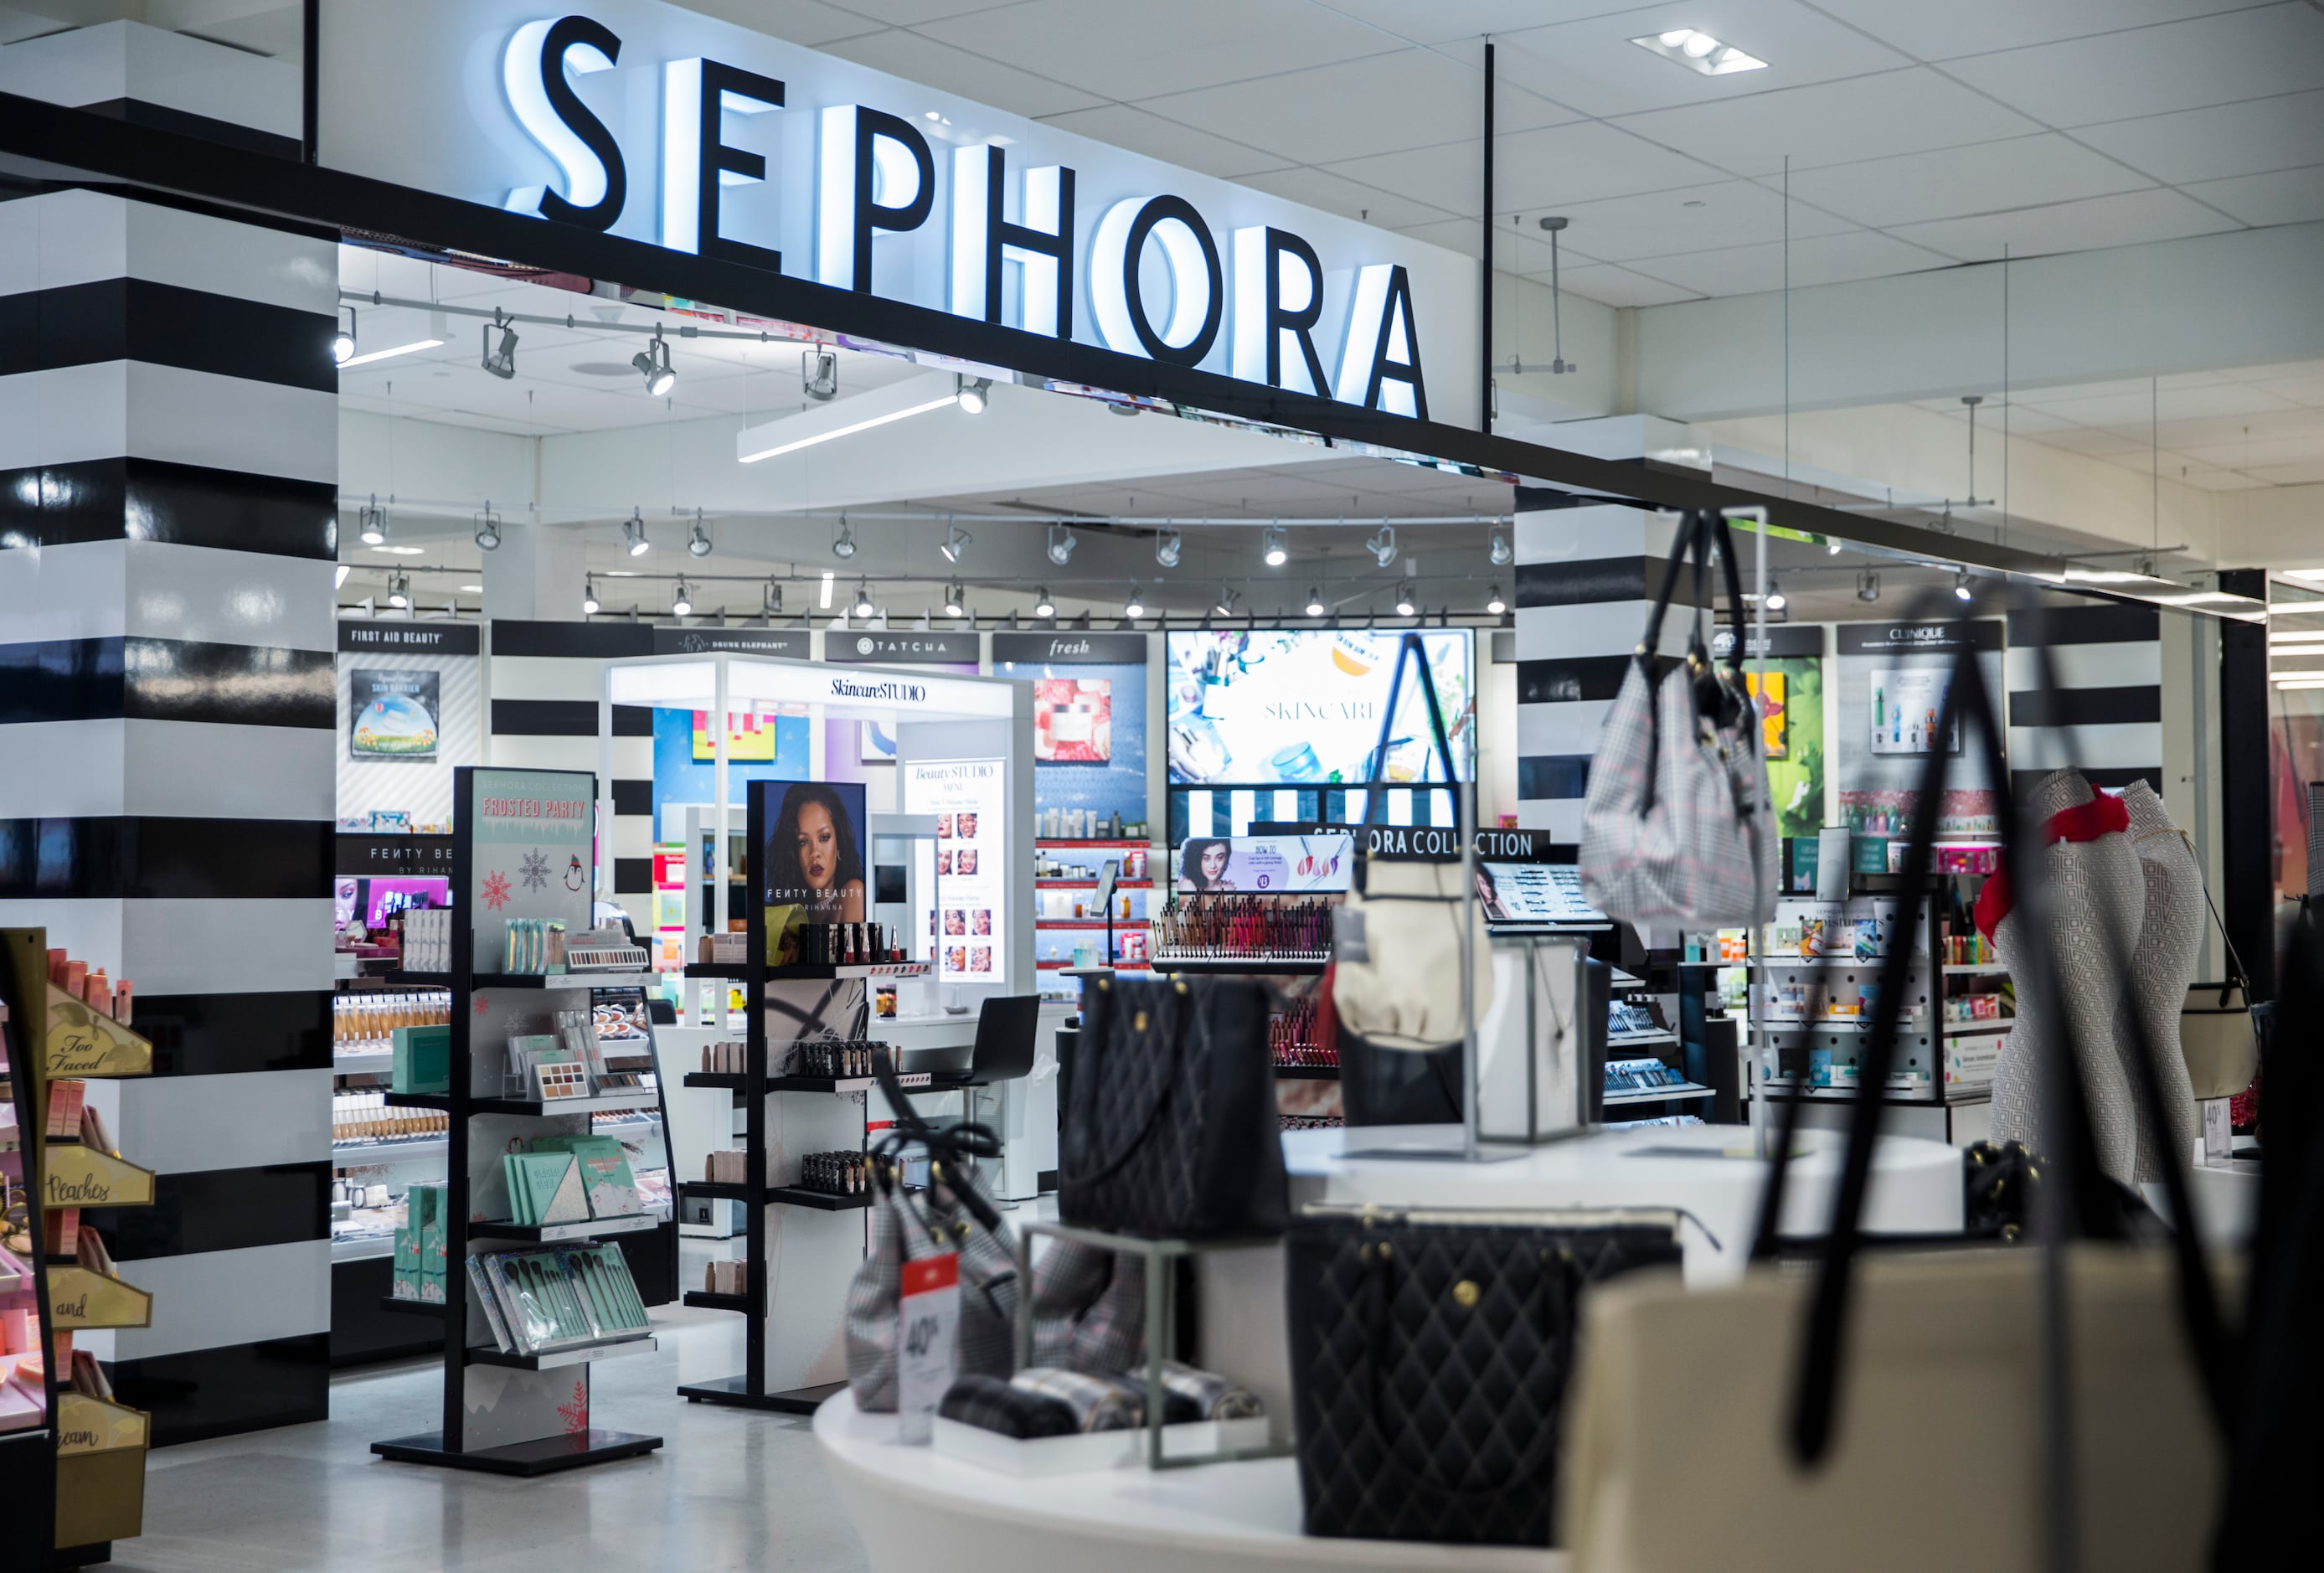 Sephora to open a store within University Mall JCPenny